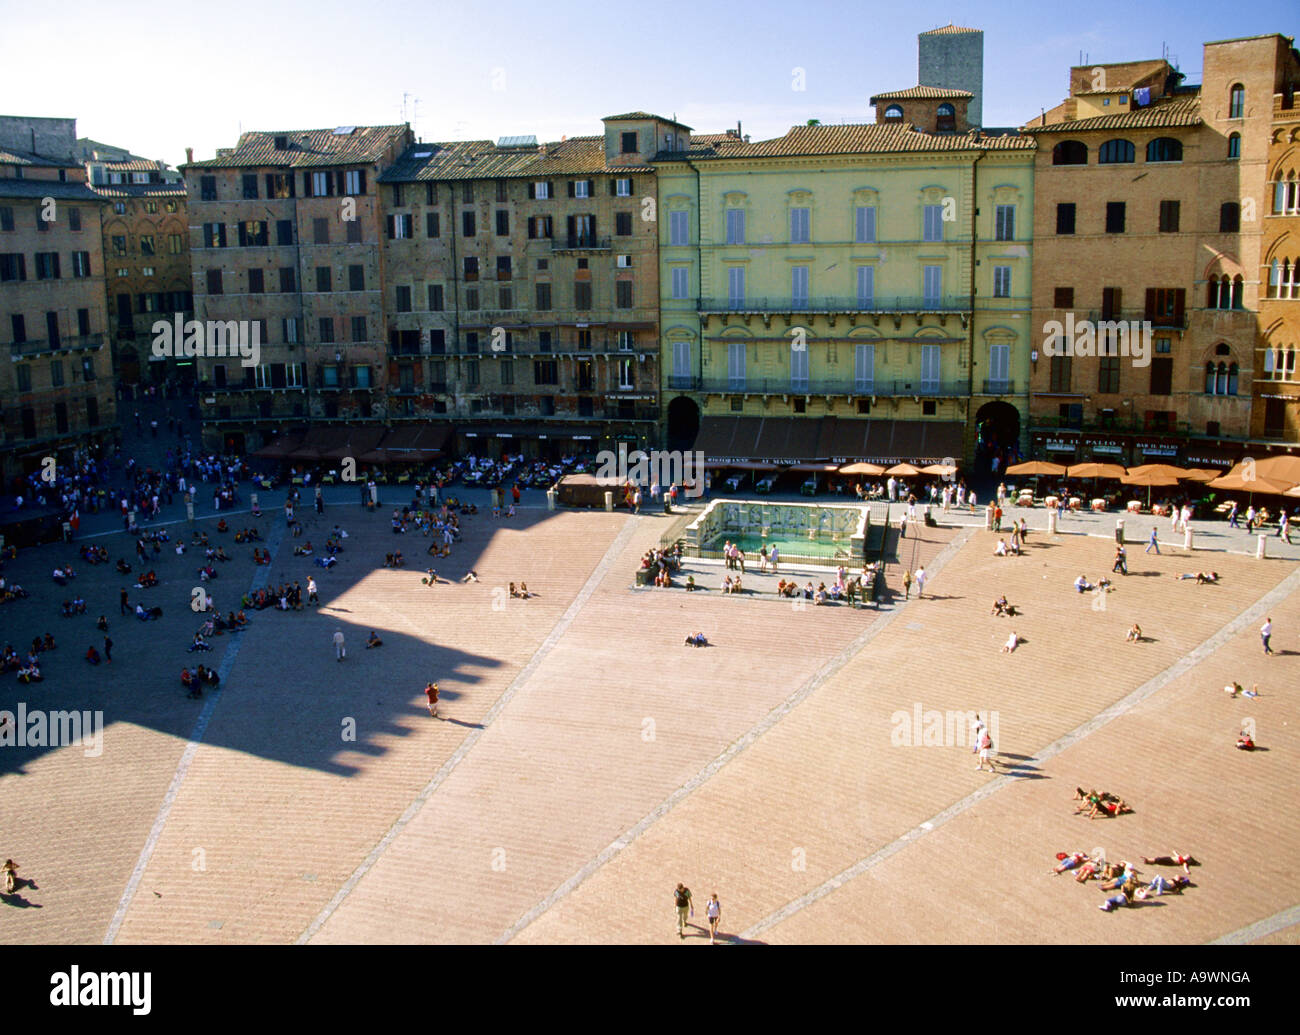 Italy, Siena, Piazza del Campo, elevated view Stock Photo